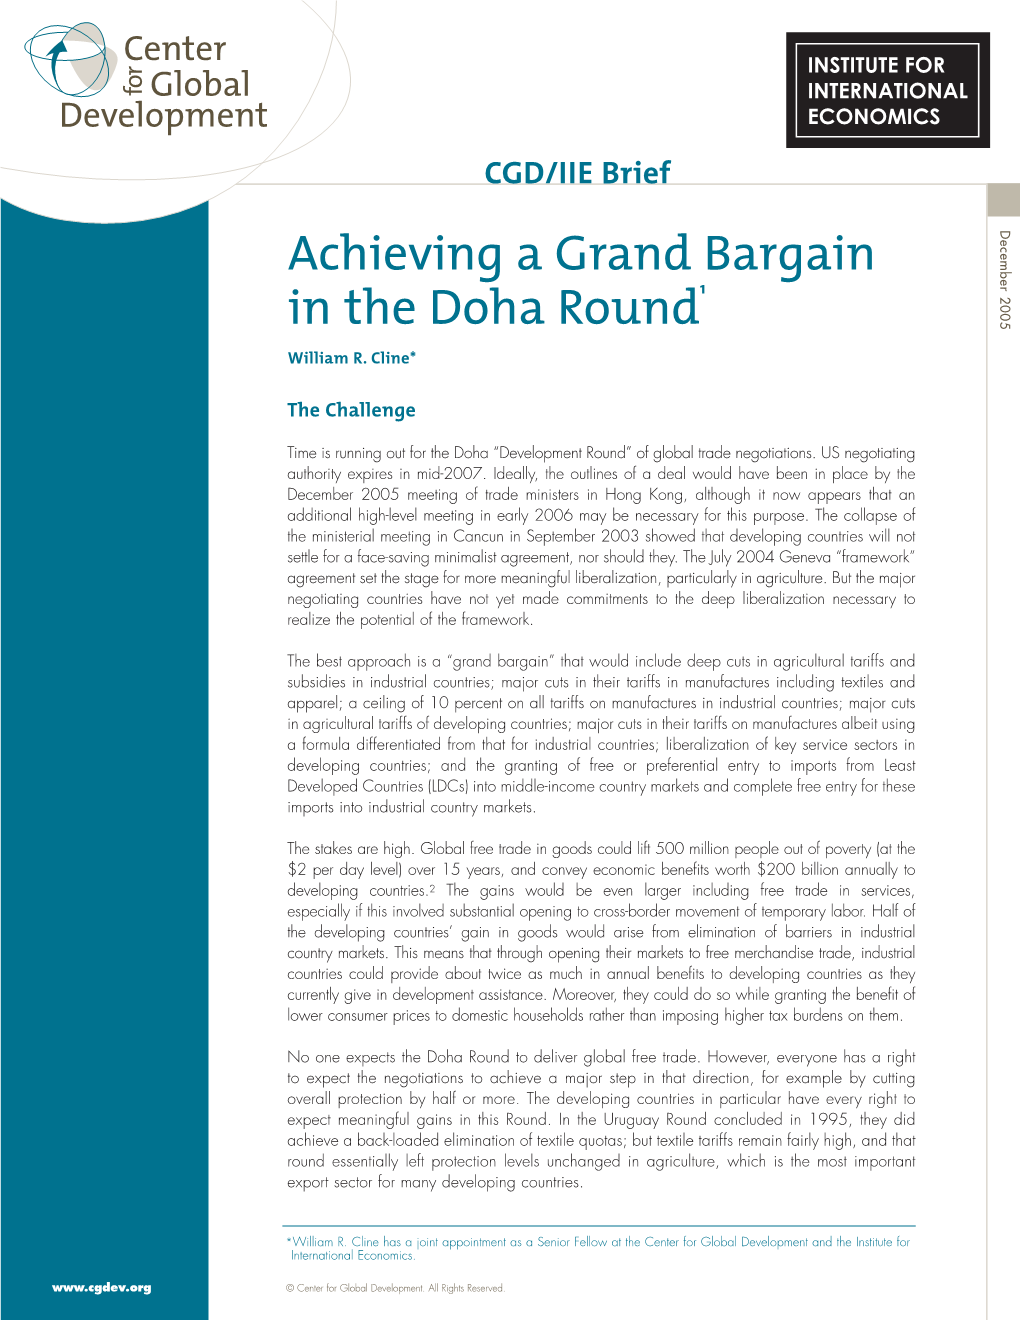 Achieving a Grand Bargain in the Doha Round1 William R